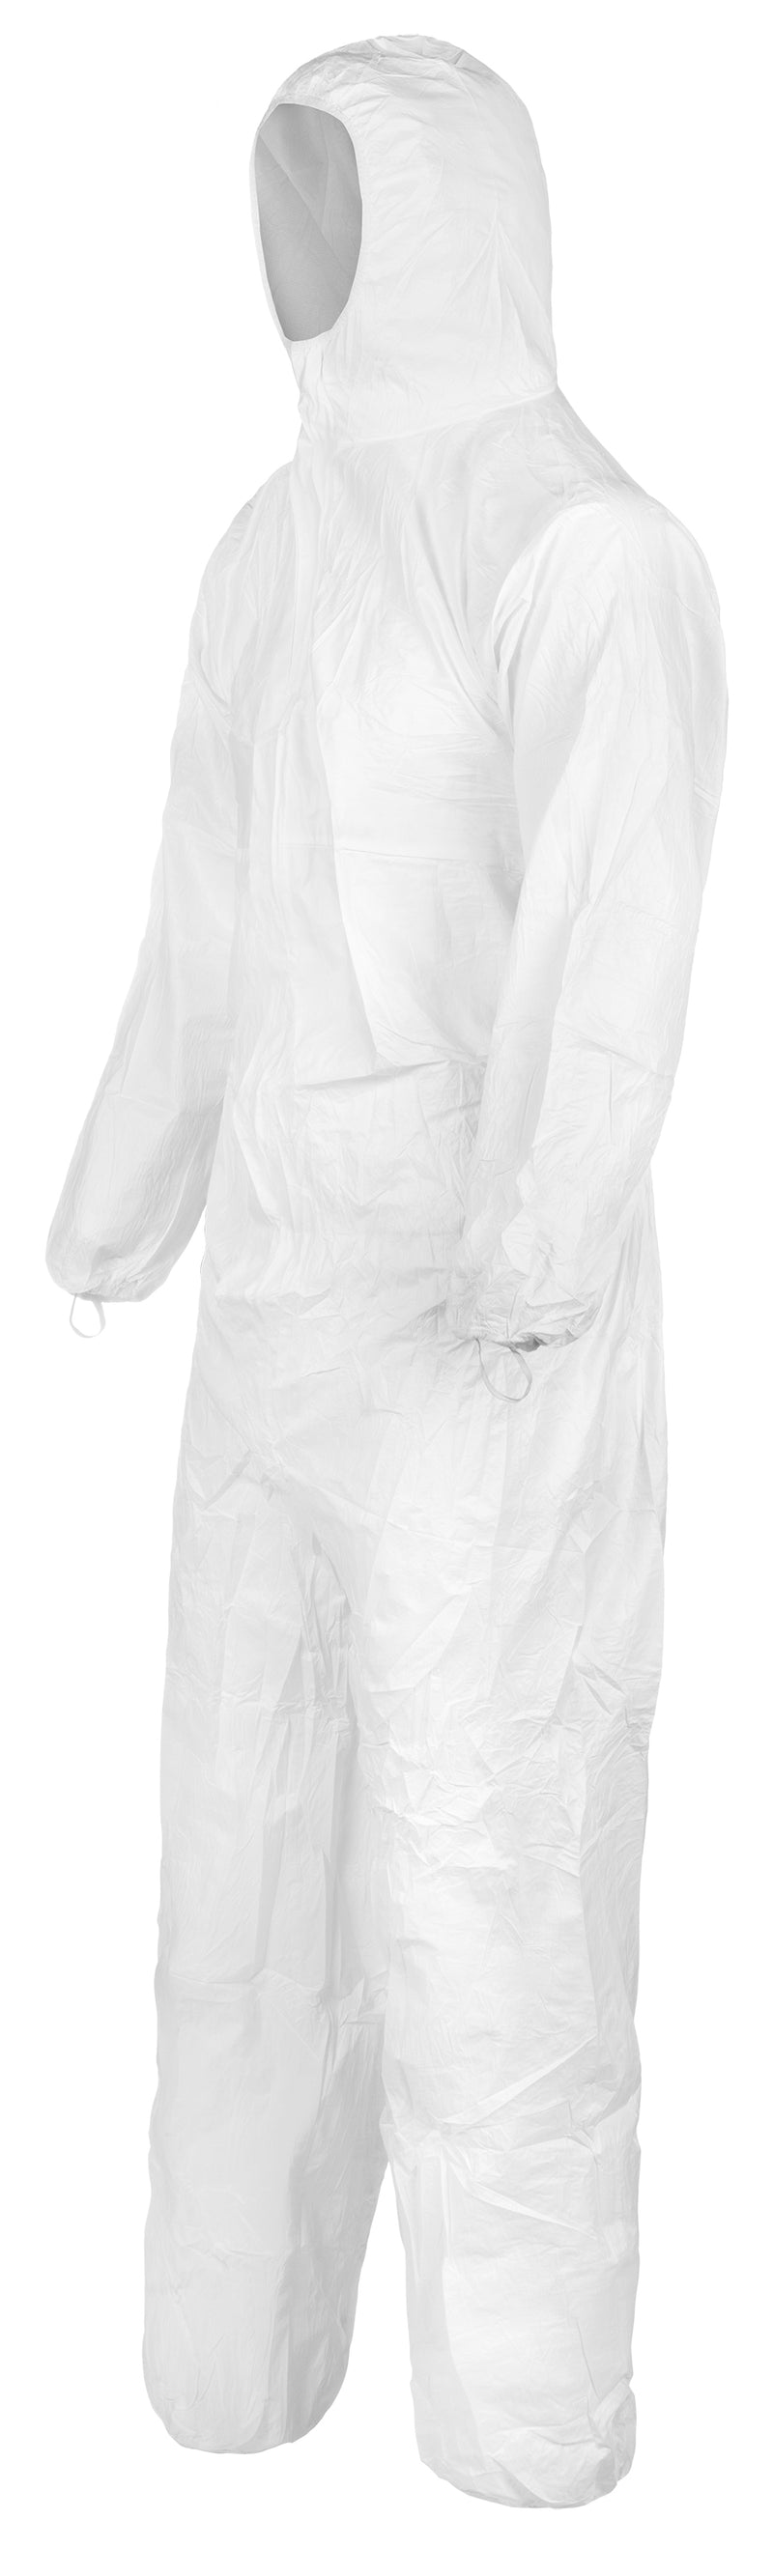 CleanMax® cleanroom protective overalls | sterile